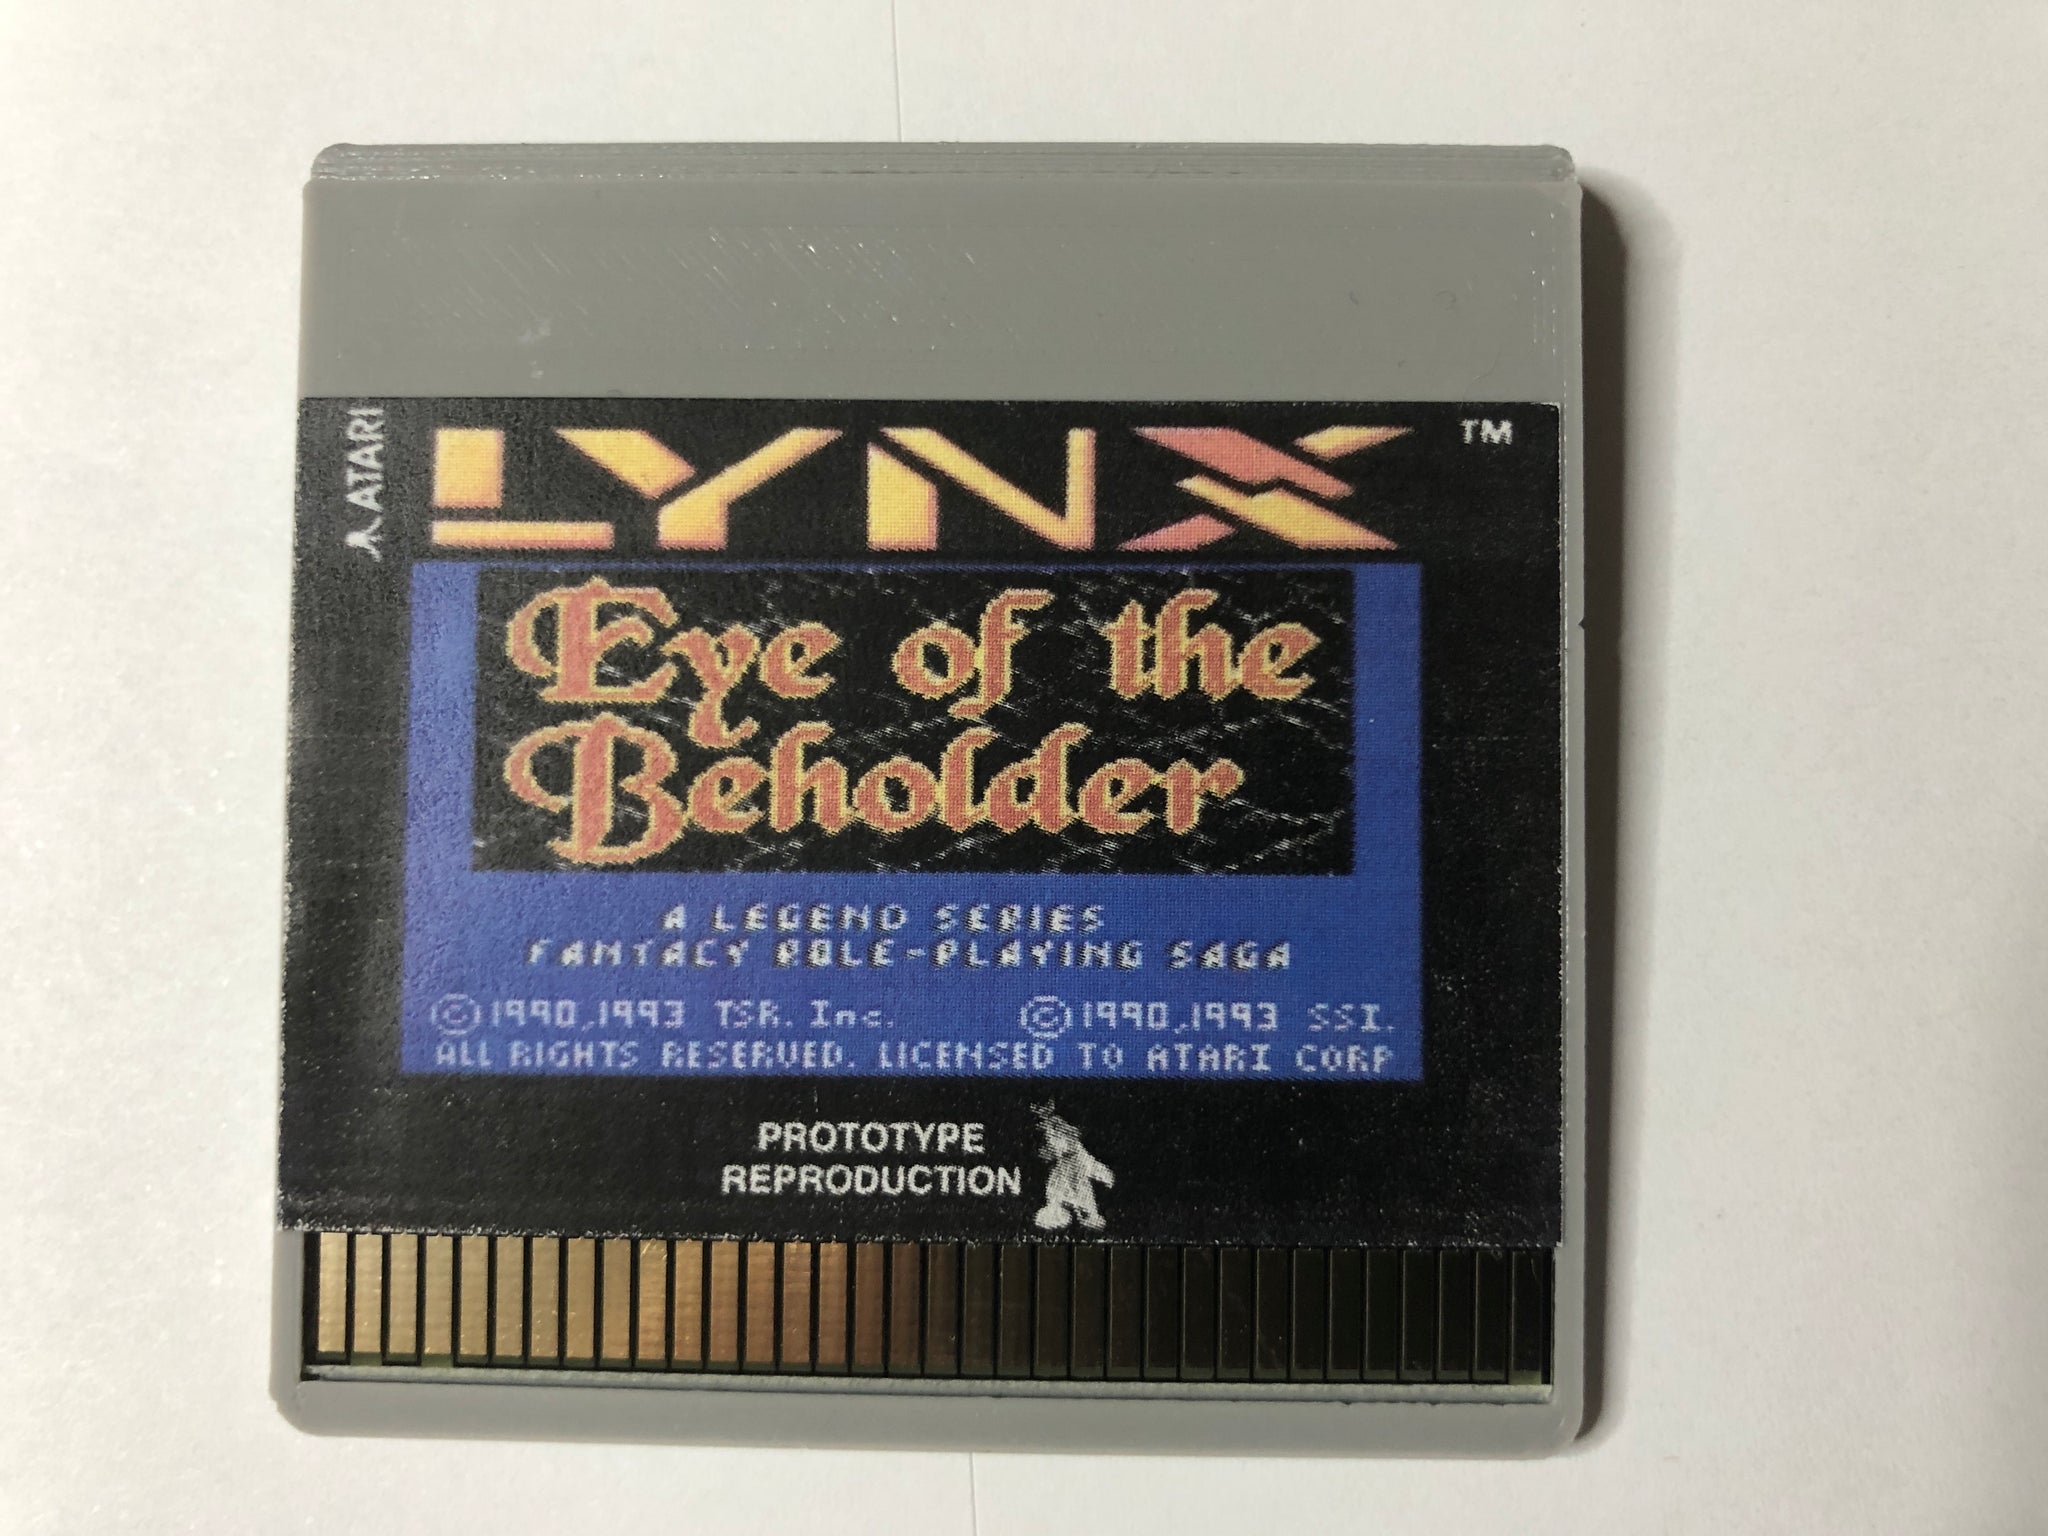 Reproduktion des „Eye of the Beholder“-Prototyps